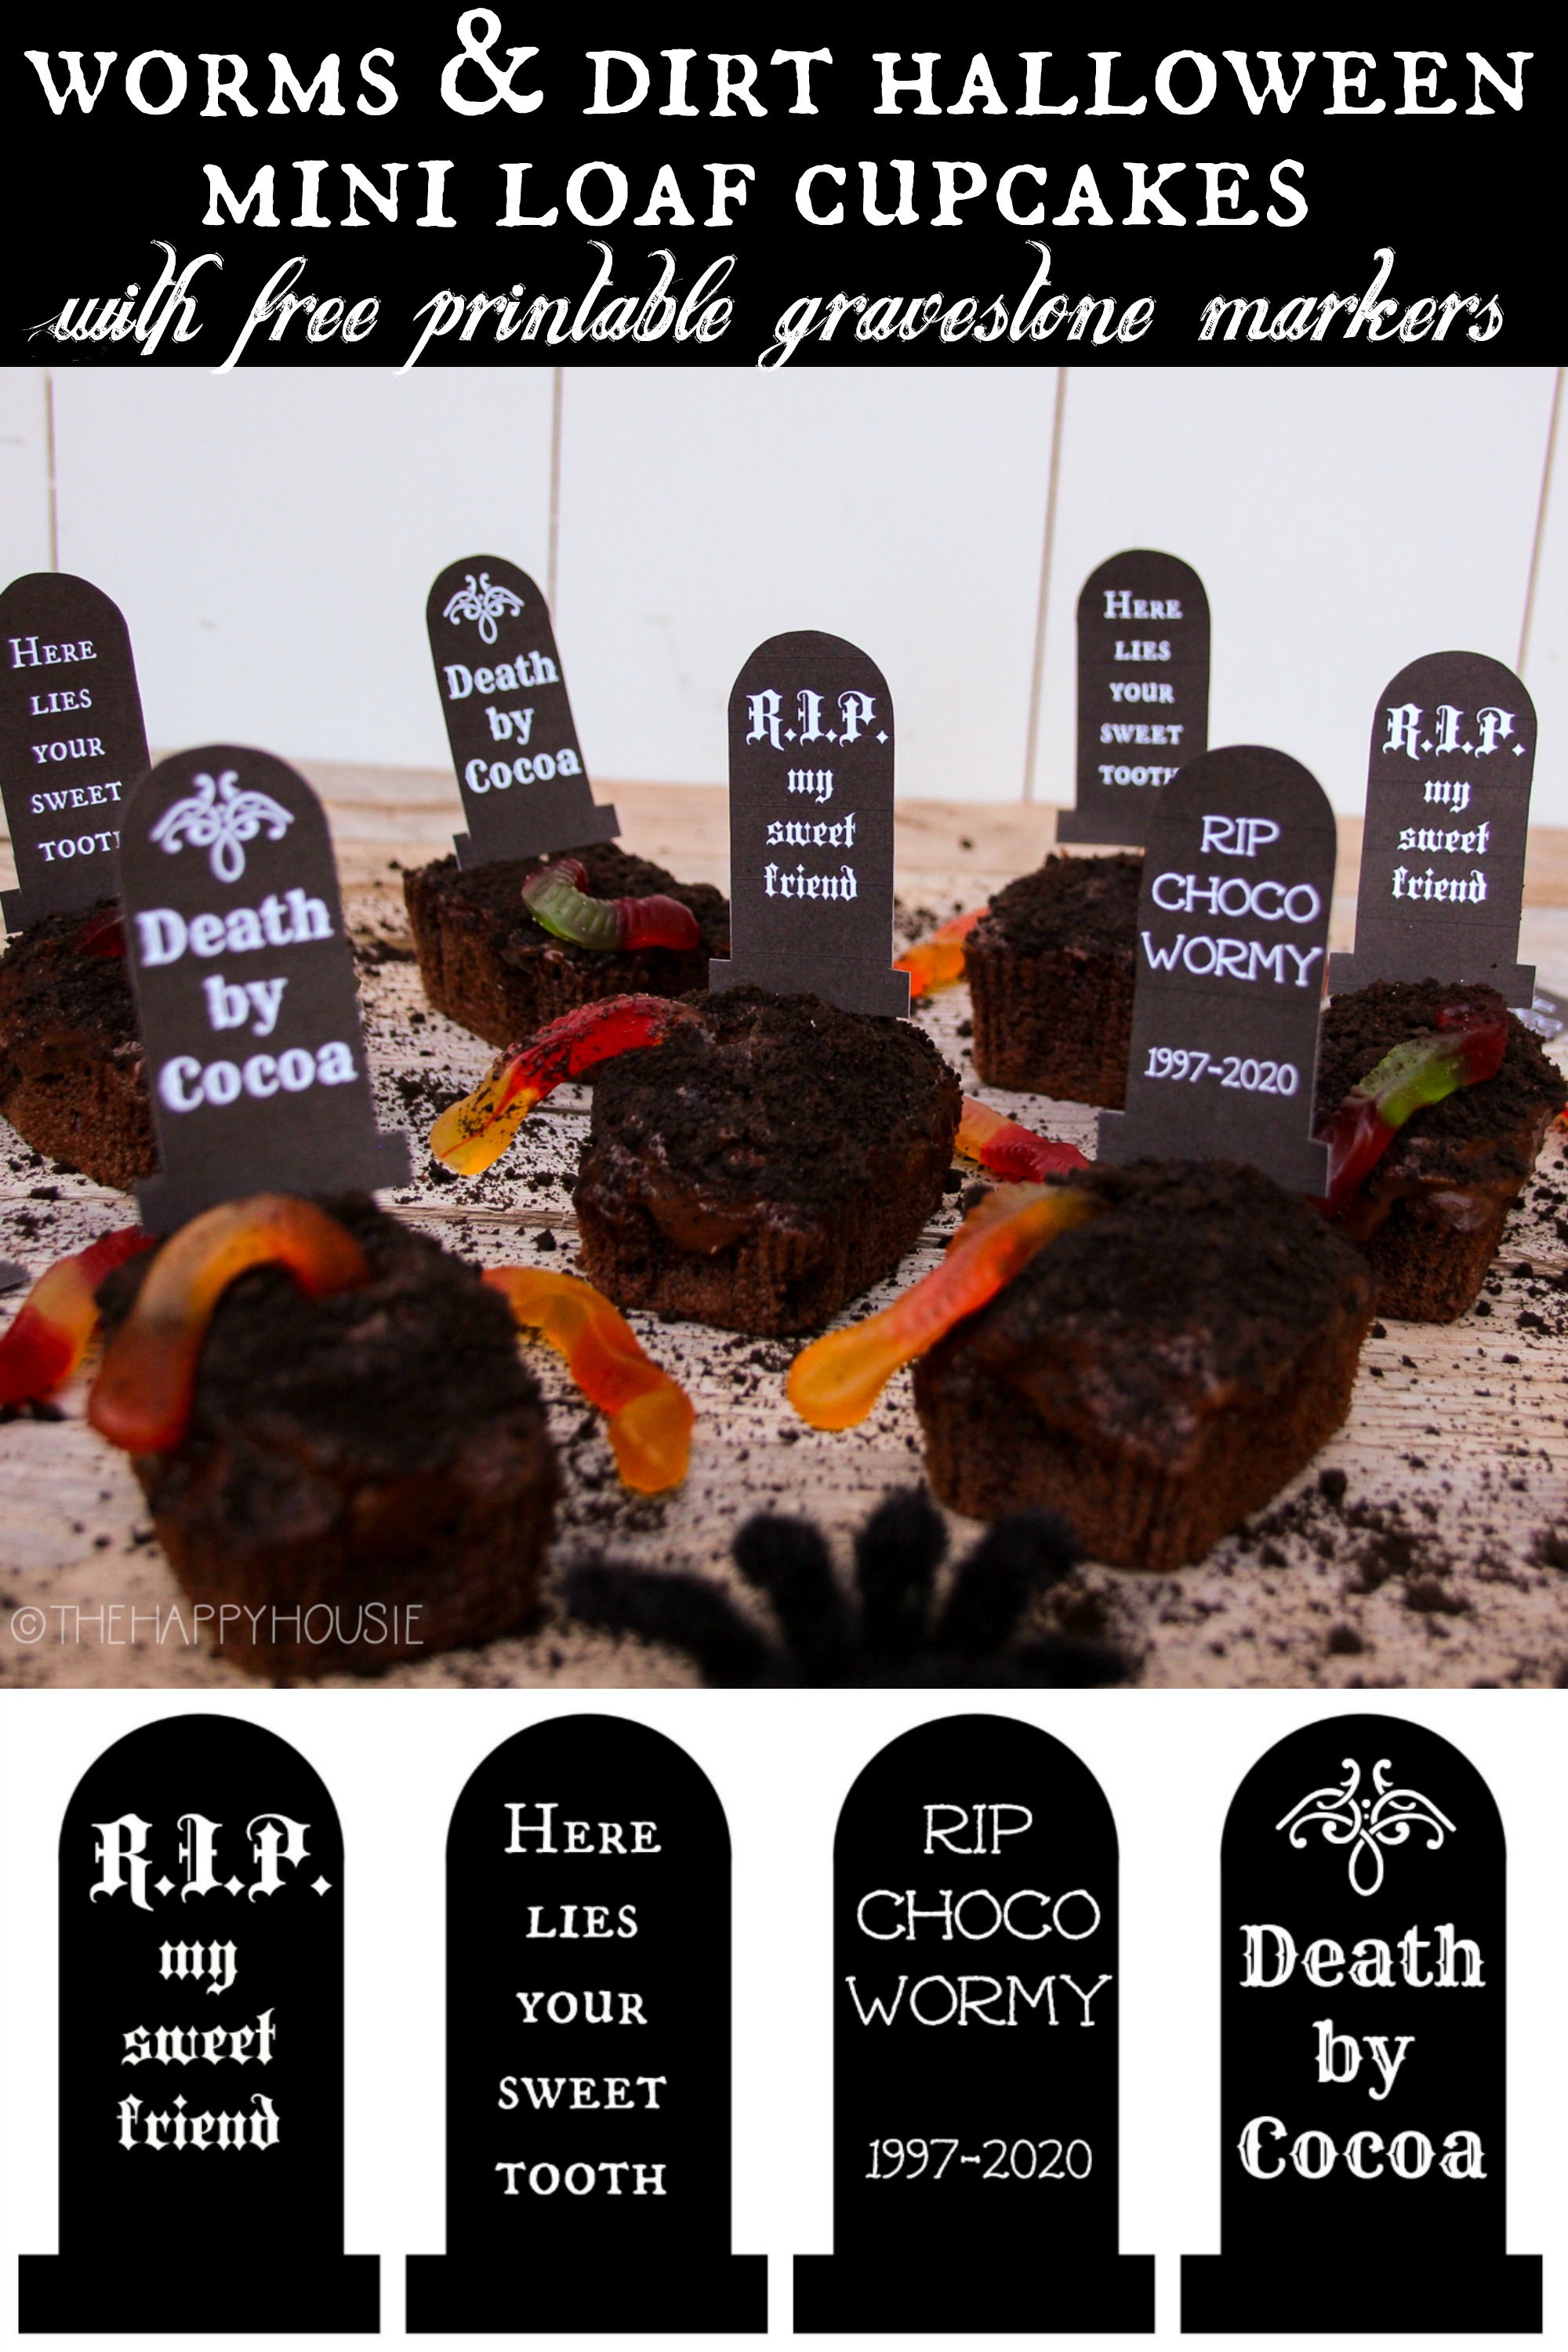 Worm & Dirt Halloween Mini Loaf Cupcakes poster.